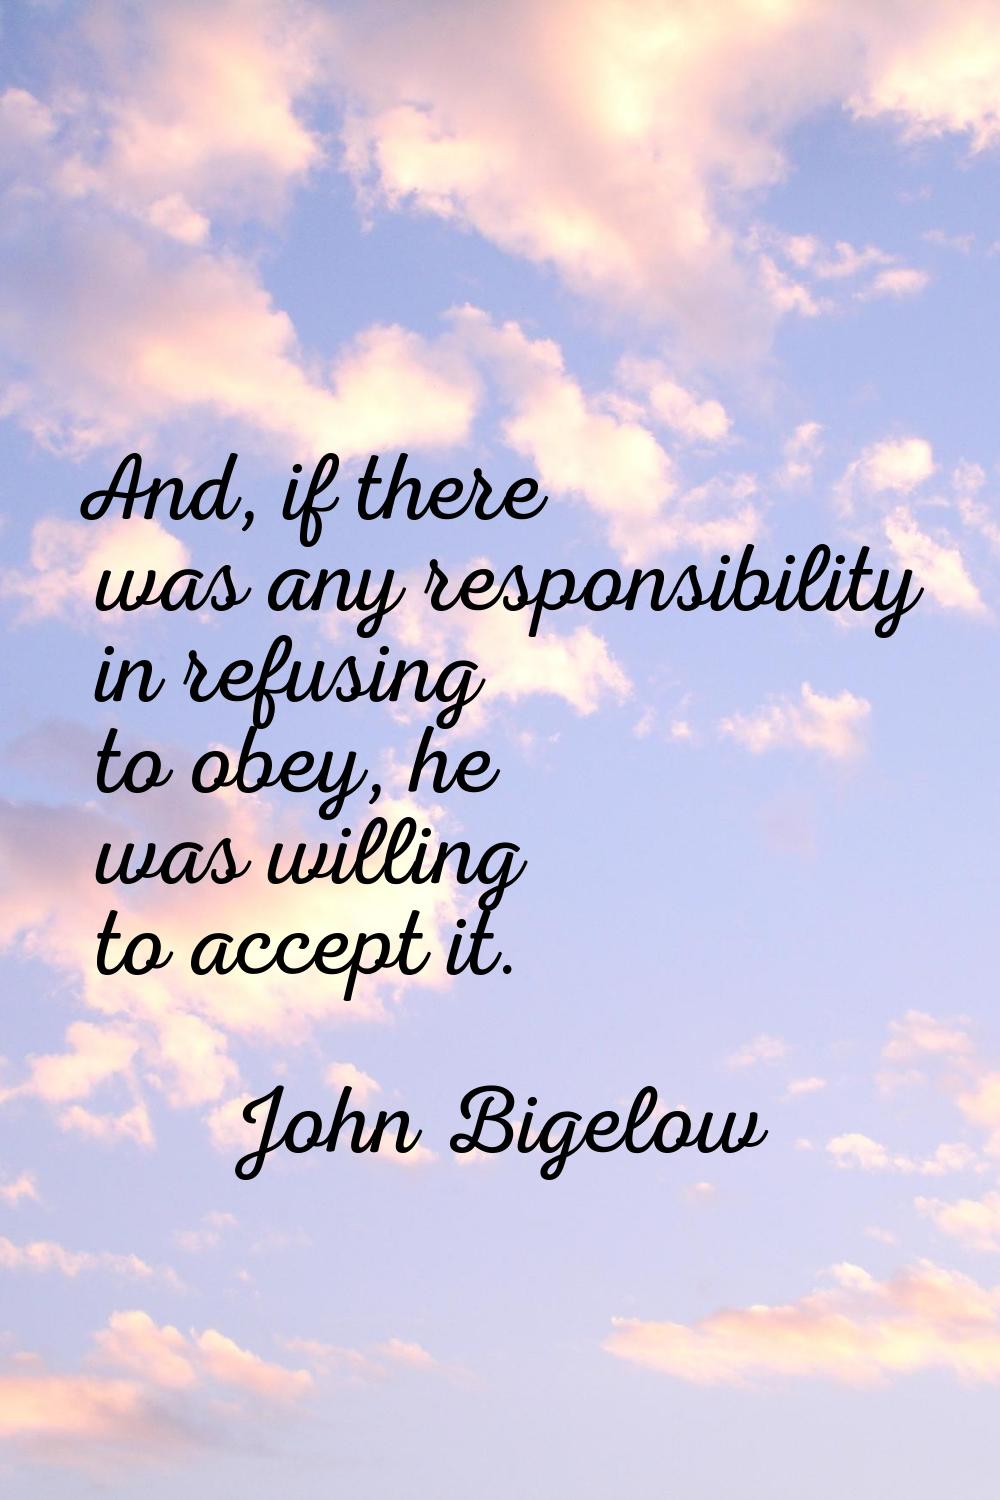 And, if there was any responsibility in refusing to obey, he was willing to accept it.